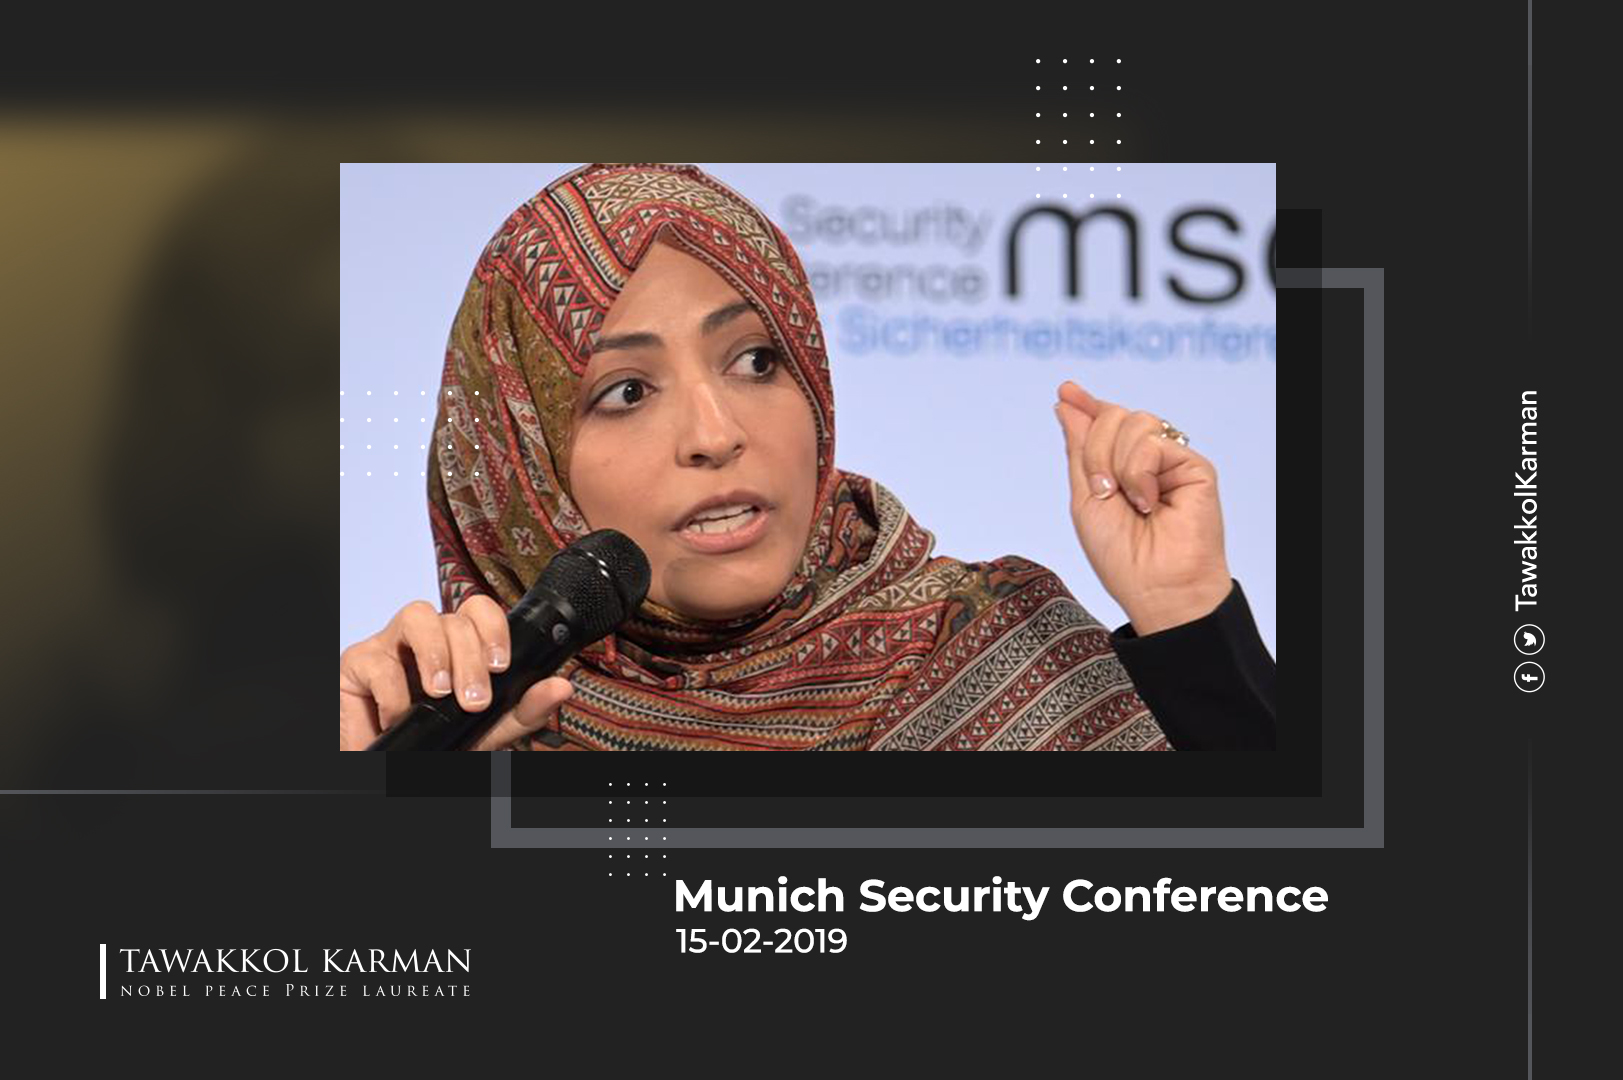 Participation of Tawakkol Karman in the Munich Security Conference